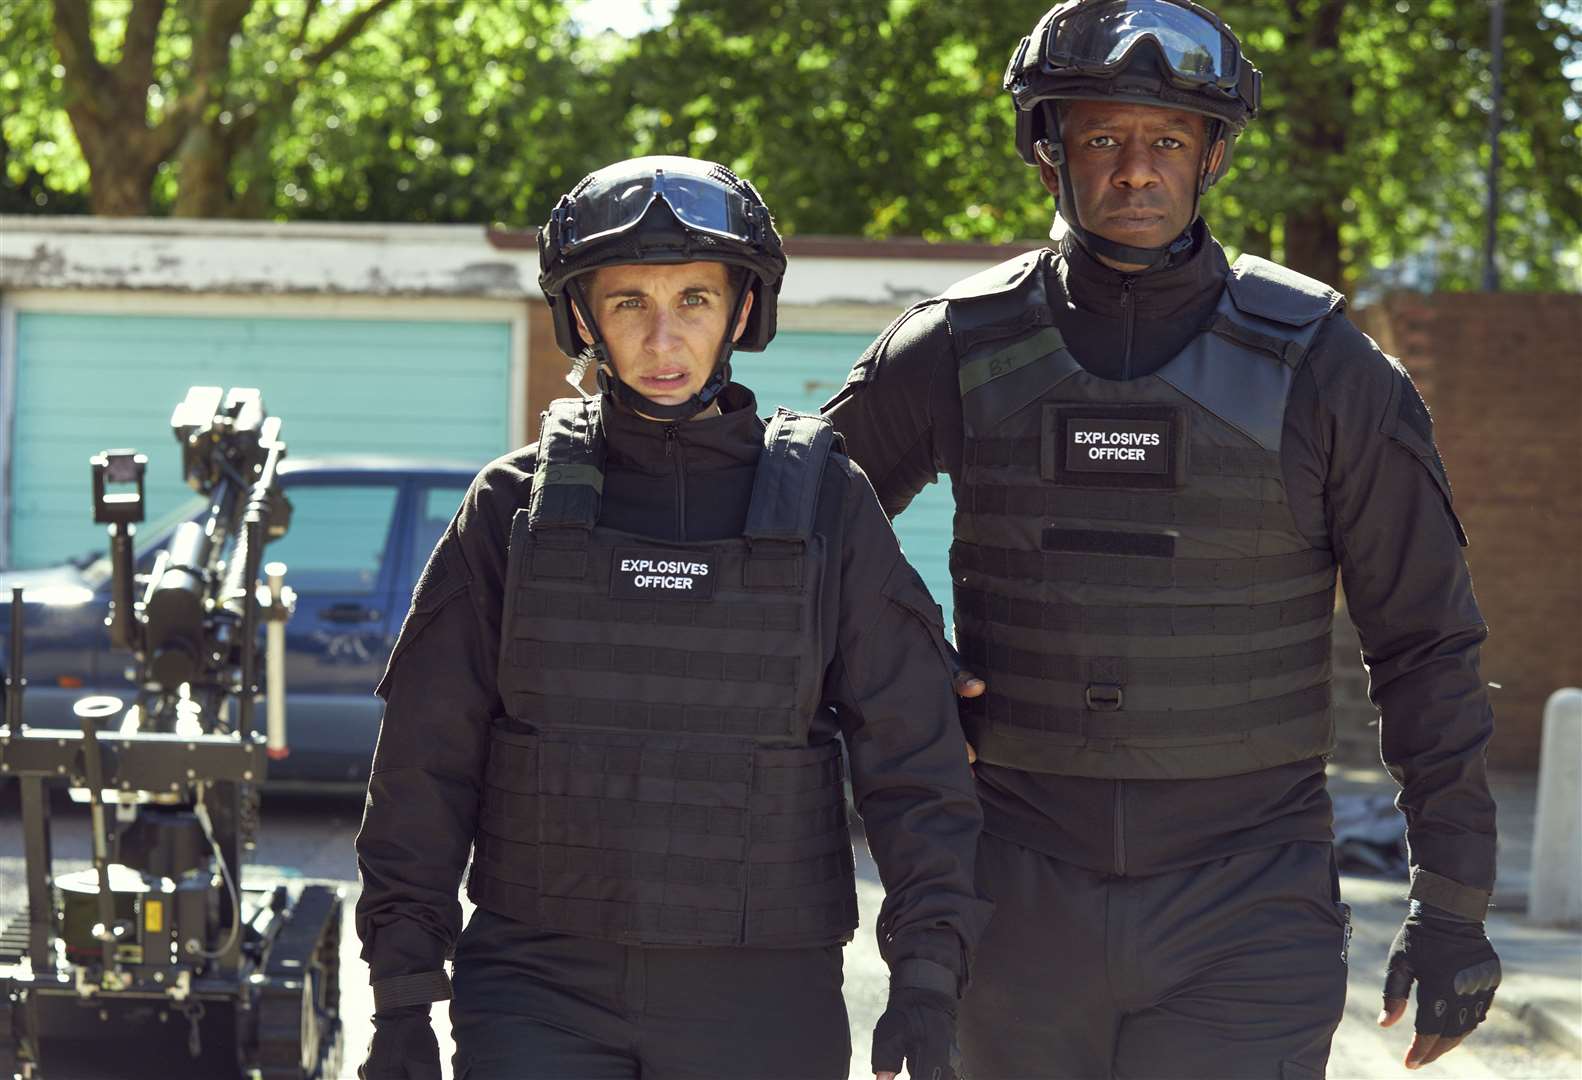 New ITV drama Trigger Point starring Vicky McClure, from Line of Duty, shot scenes in the Dartford Marshes. Photo: ITV